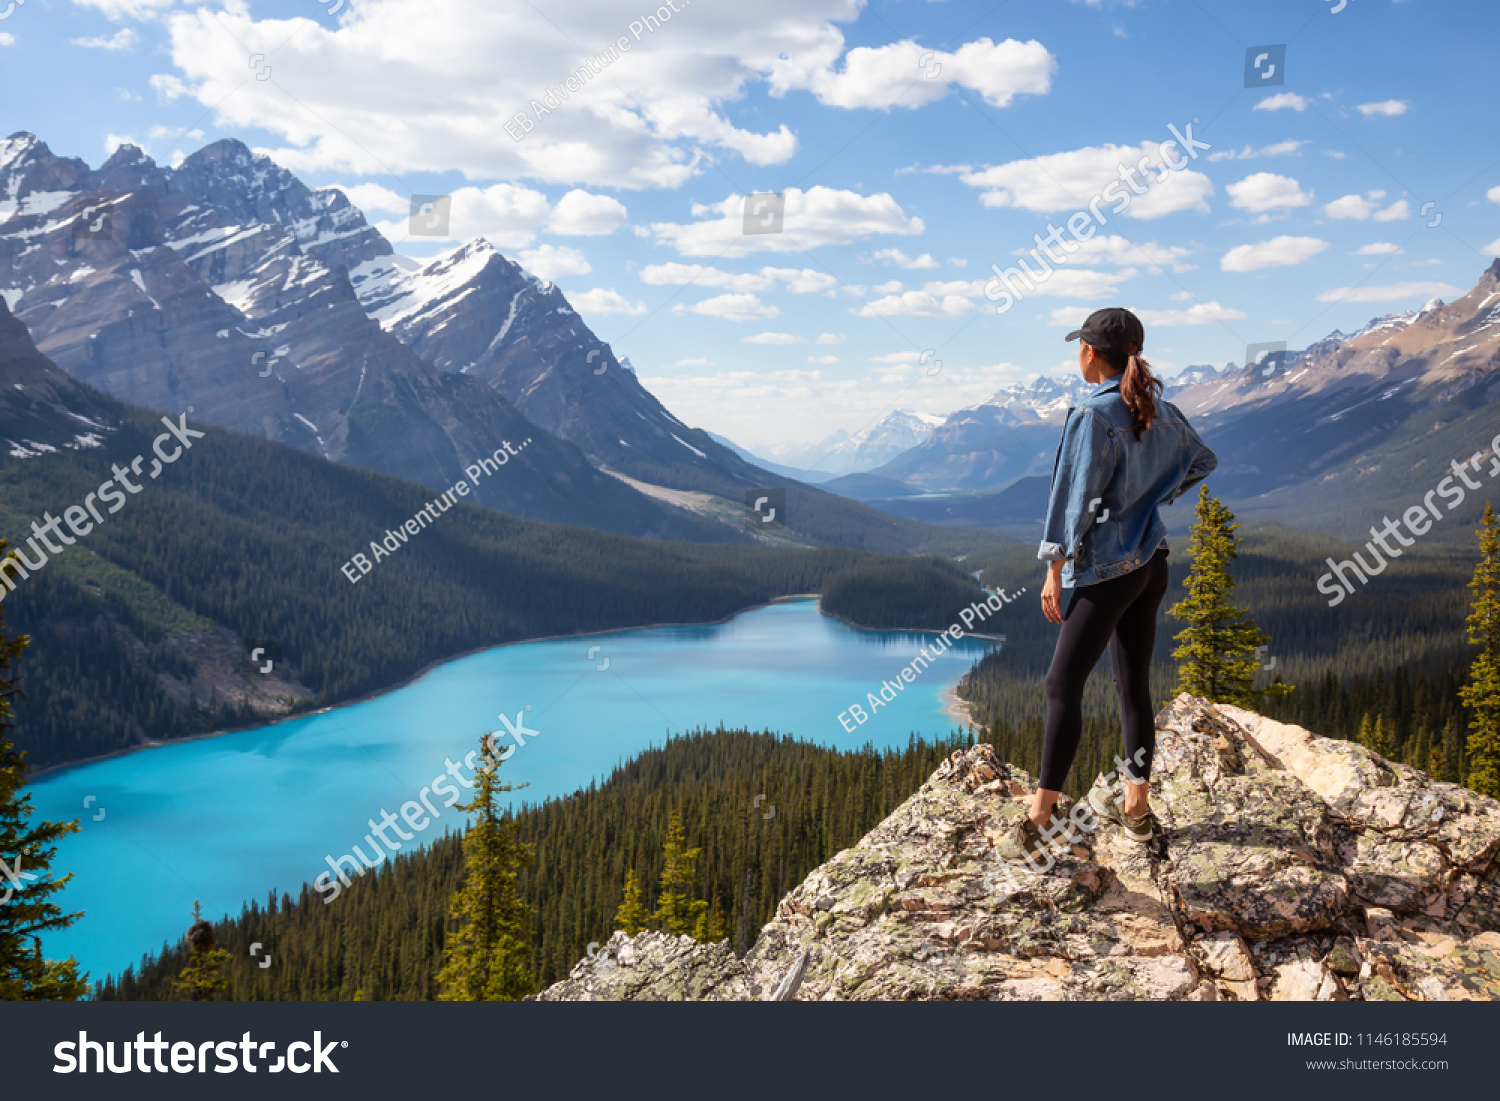 Young girl enjoying the beautiful Canadian Rockies Landscape view during a vibrant sunny summer day. Taken in Peyto Lake, Banff National Park, Alberta, Canada. #1146185594